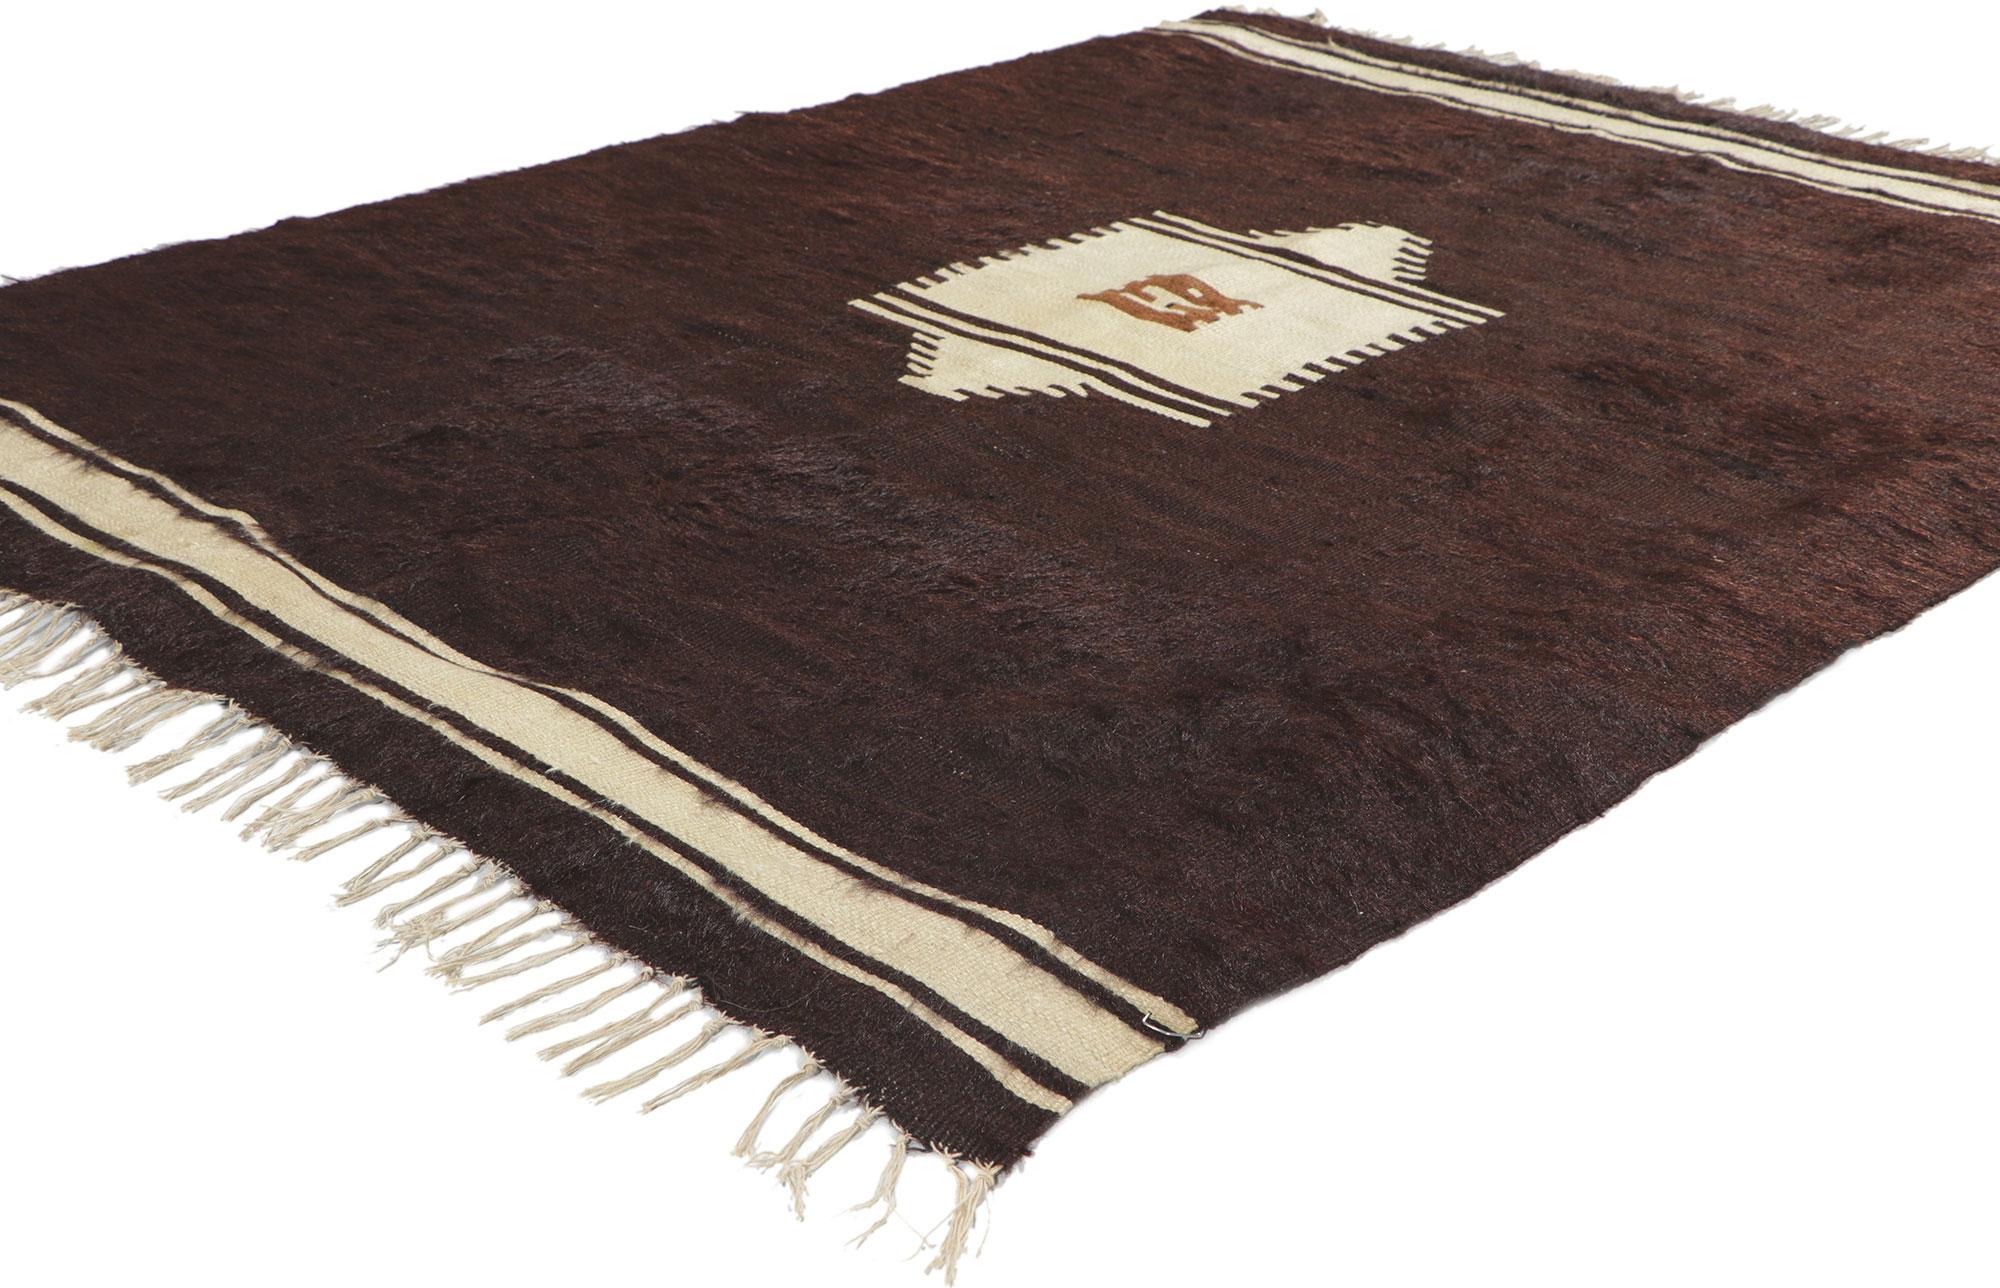 53830 Vintage Turkish Angora Wool Kilim Blanket Rug, 03'11 x 05'01. With its shaggy pile, incredible detail and texture, this handwoven Turkish angora kilim rug is a captivating vision of woven beauty. The eye-catching geometric design and earthy